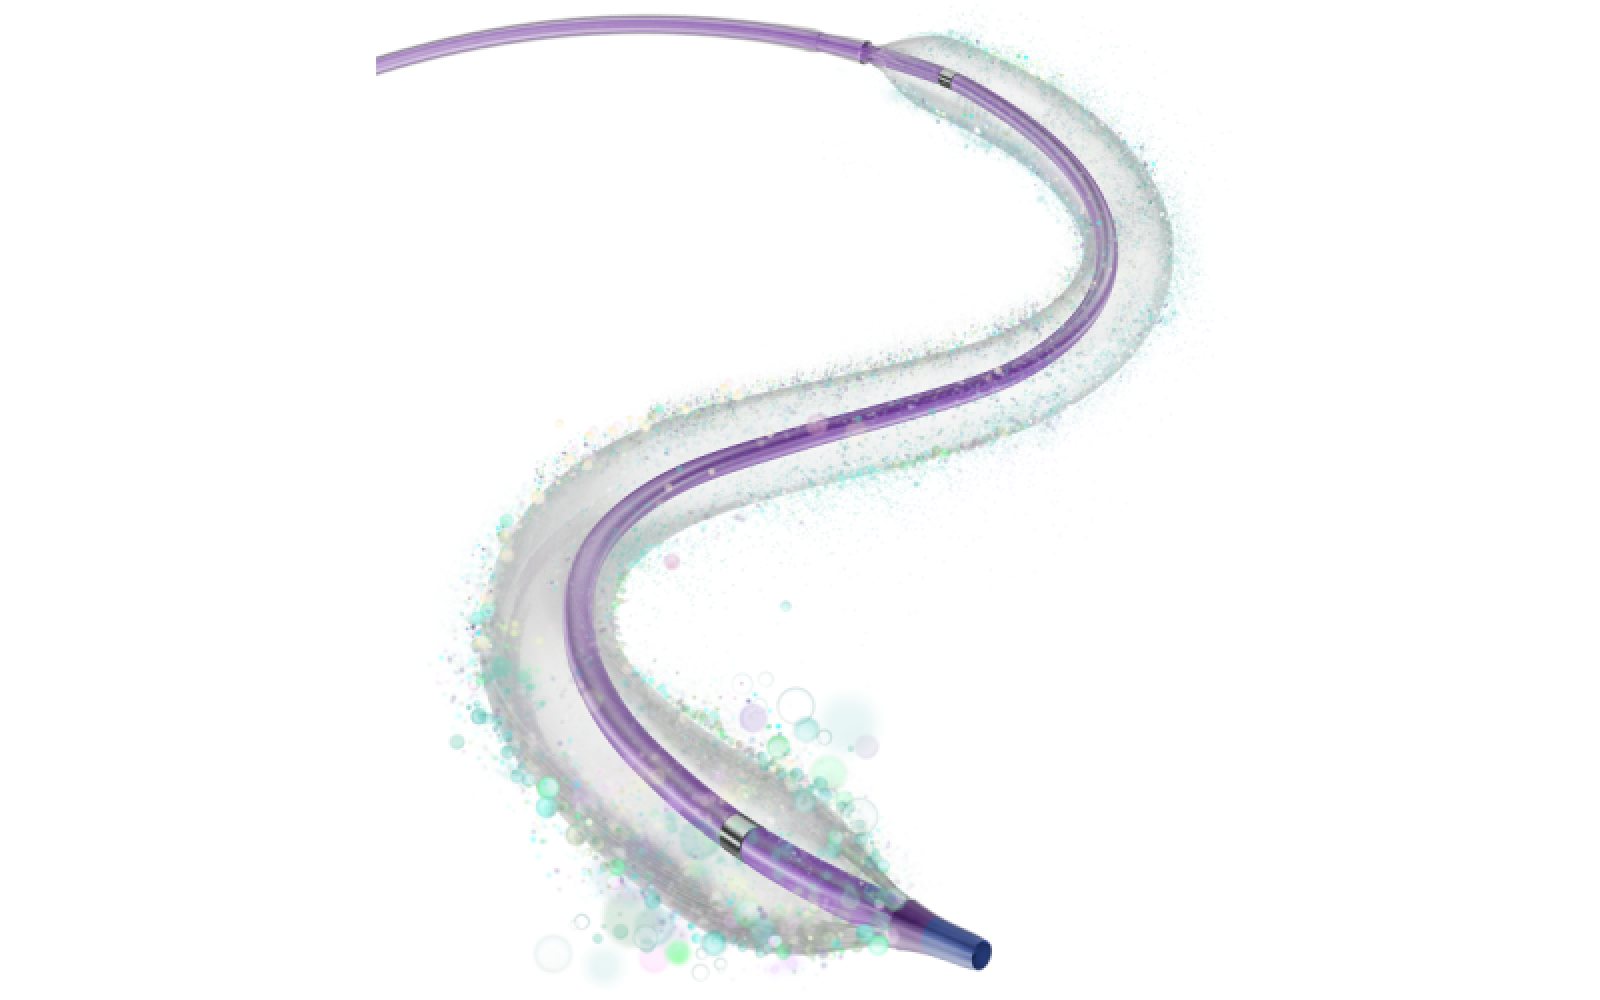 IN.PACT™ Admiral™ drug-coated balloon (Medtronic)